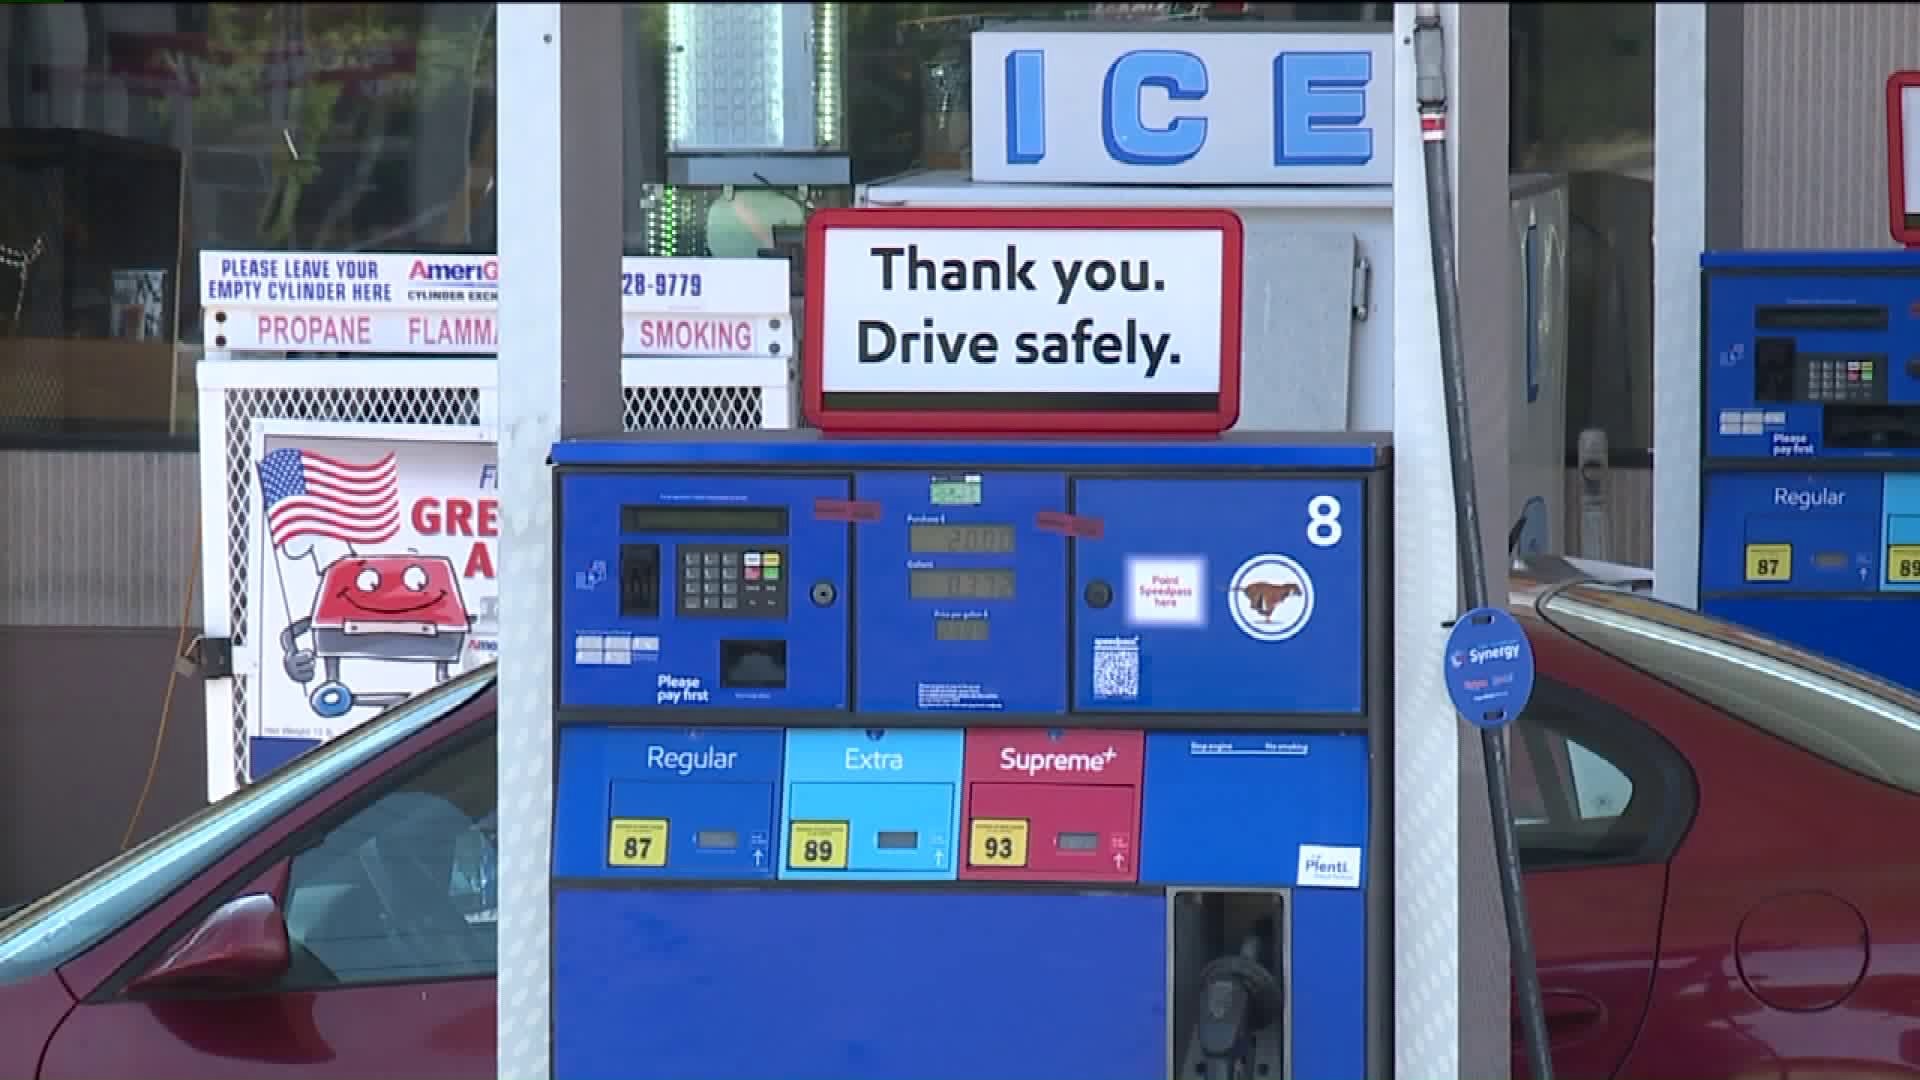 Card Skimming Suspected at Another Schuylkill County Gas Station